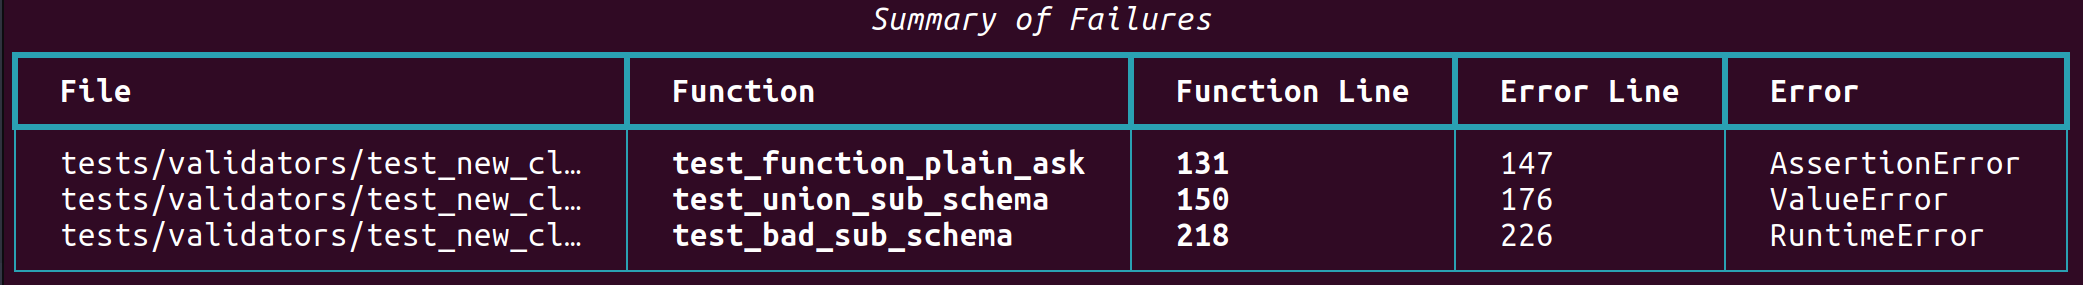 Table of Failures